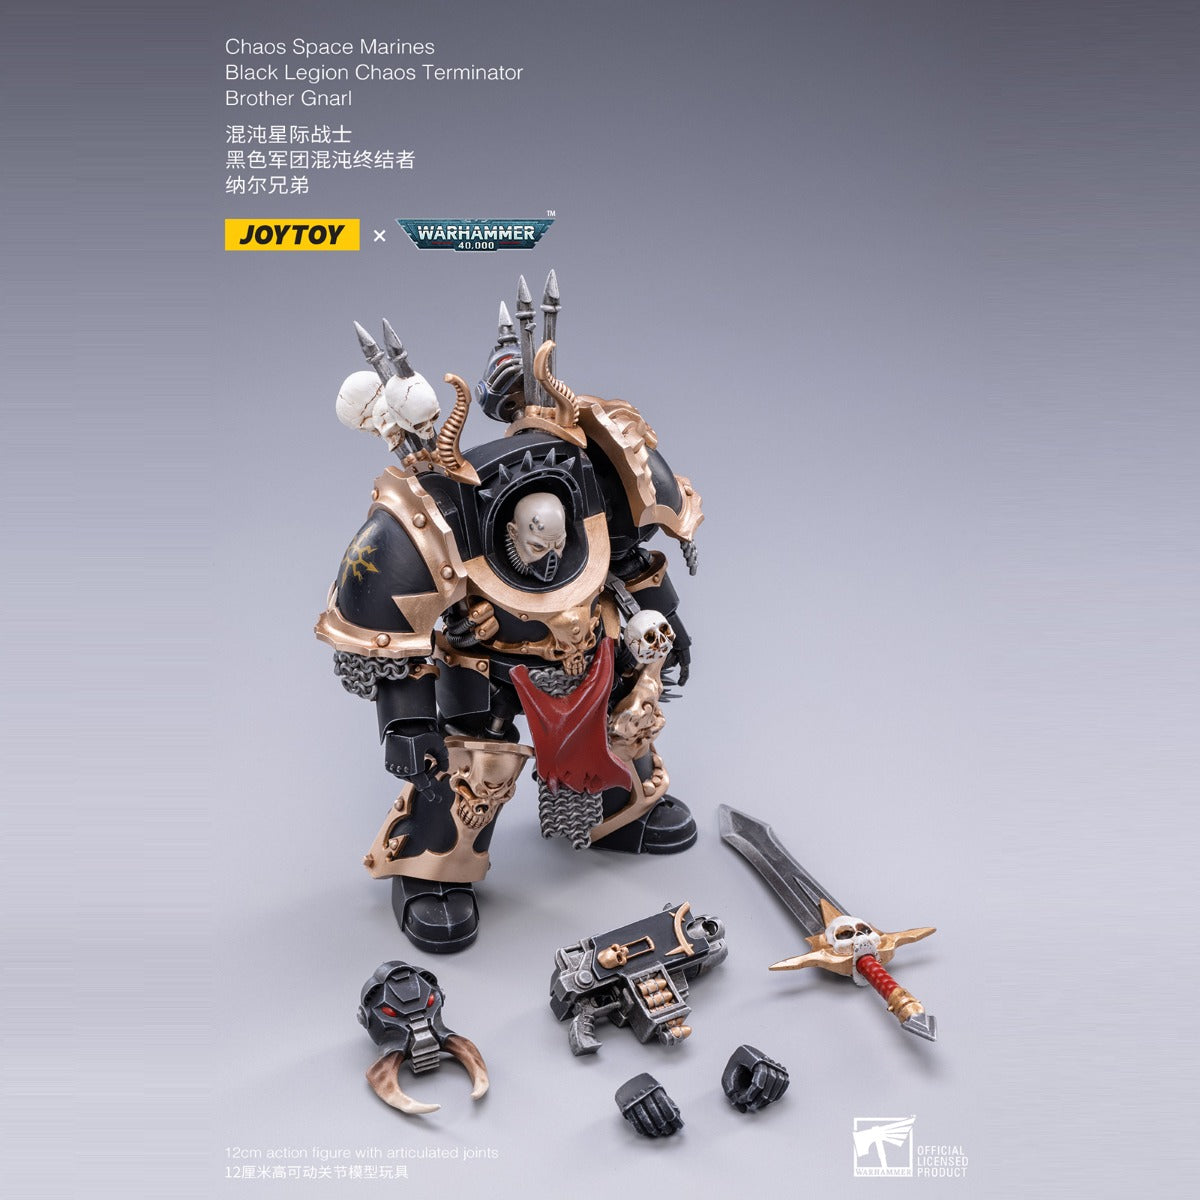 Warhammer Collectibles: 1/18 Scale Brother Gnarl